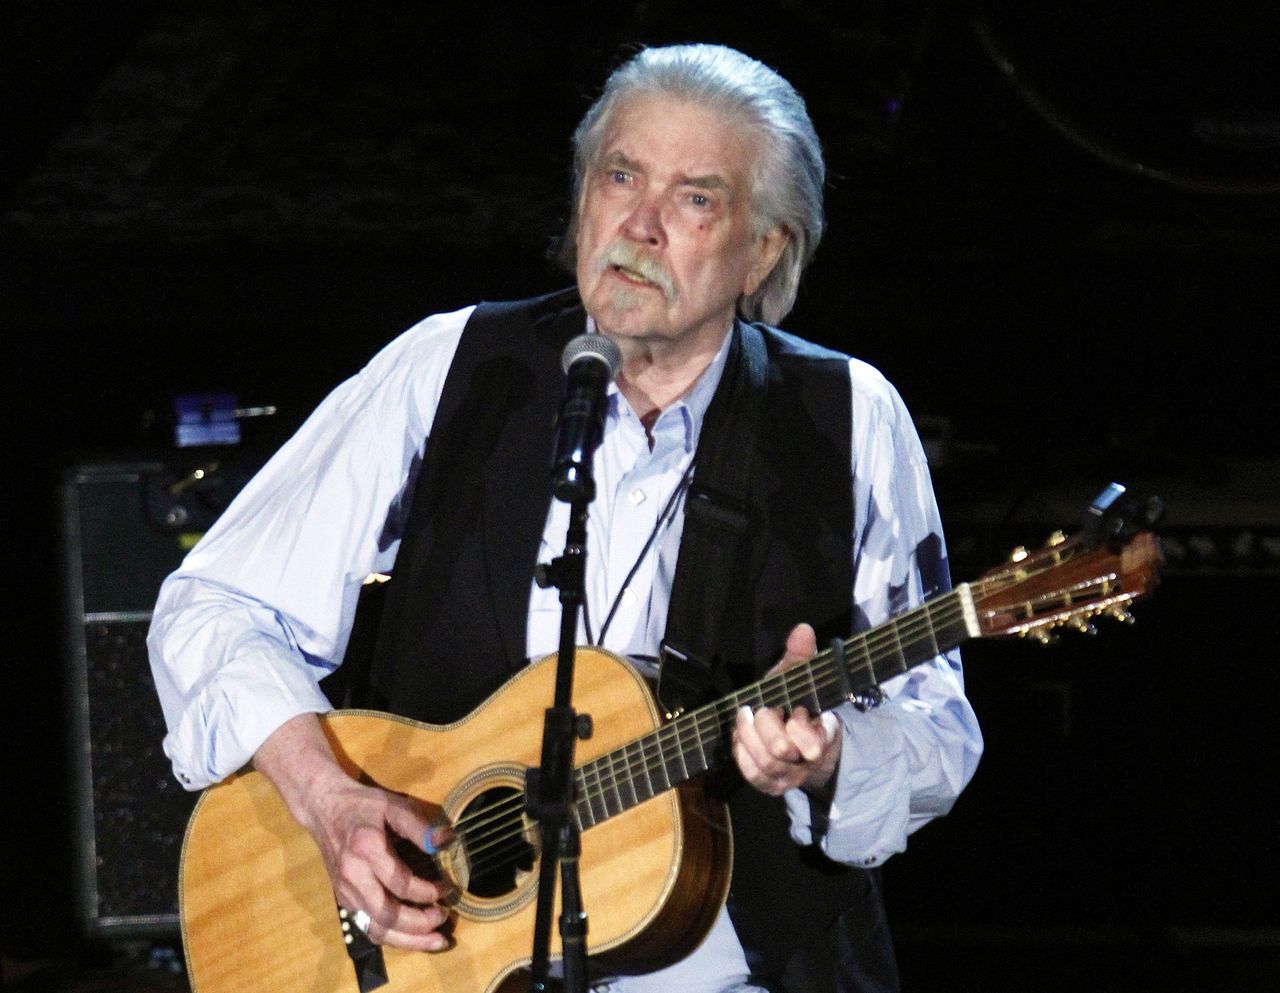 This Sept. 12, 2012, photo shows Guy Clark at the 11th annual Americana Honors & Awards in Nashville, Tennessee. Clark died Tuesday at his home in Nashville.